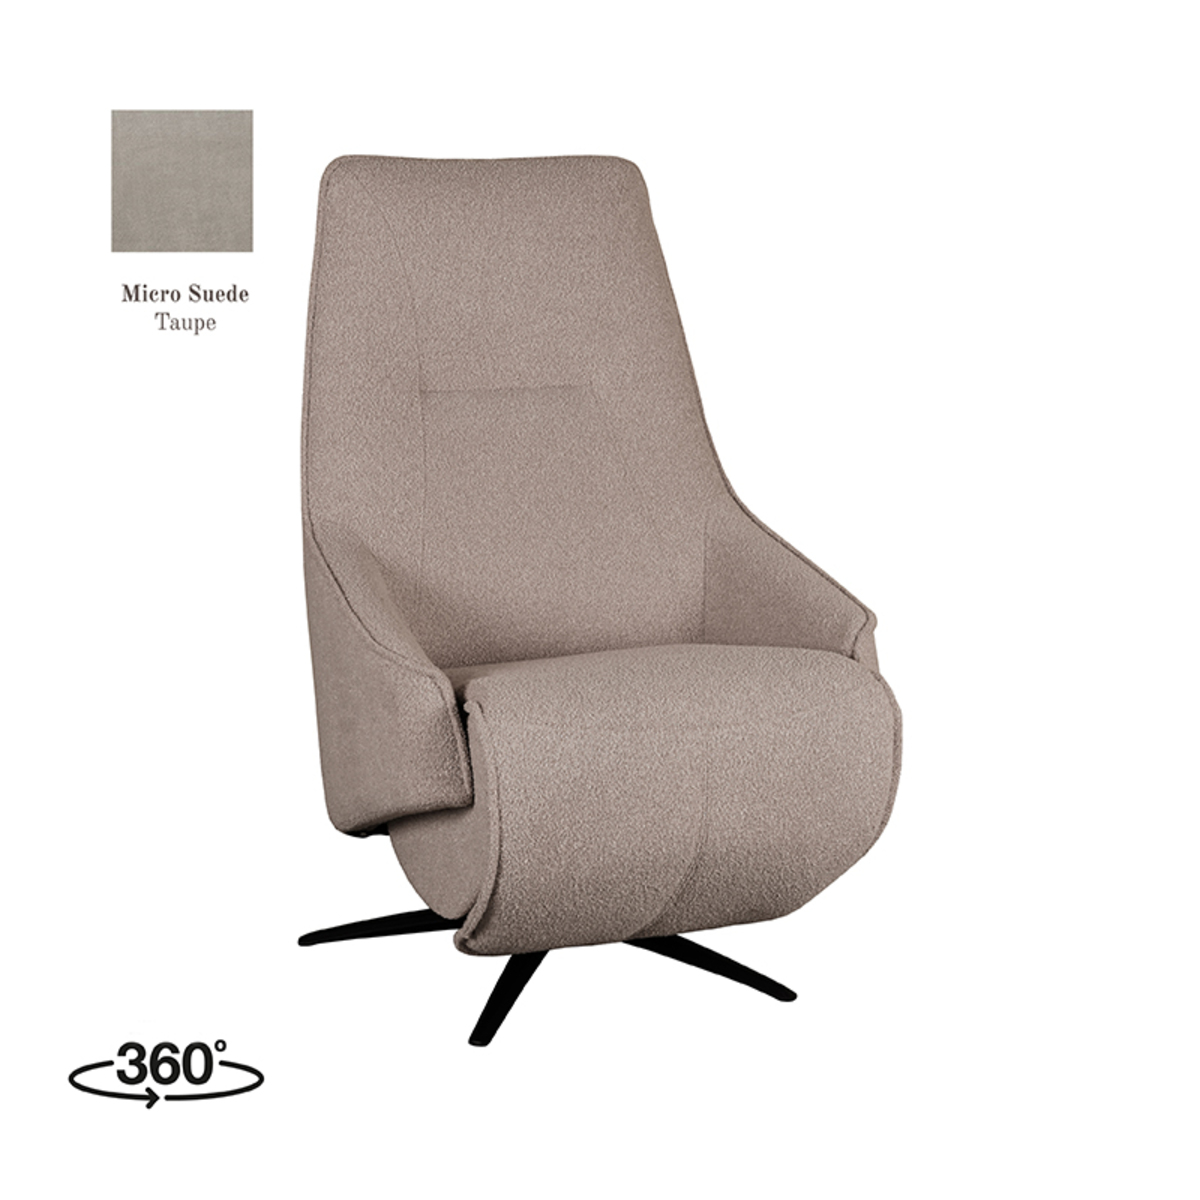 LABEL51 Fauteuil Odense - Taupe - Micro Suede - Elektrische